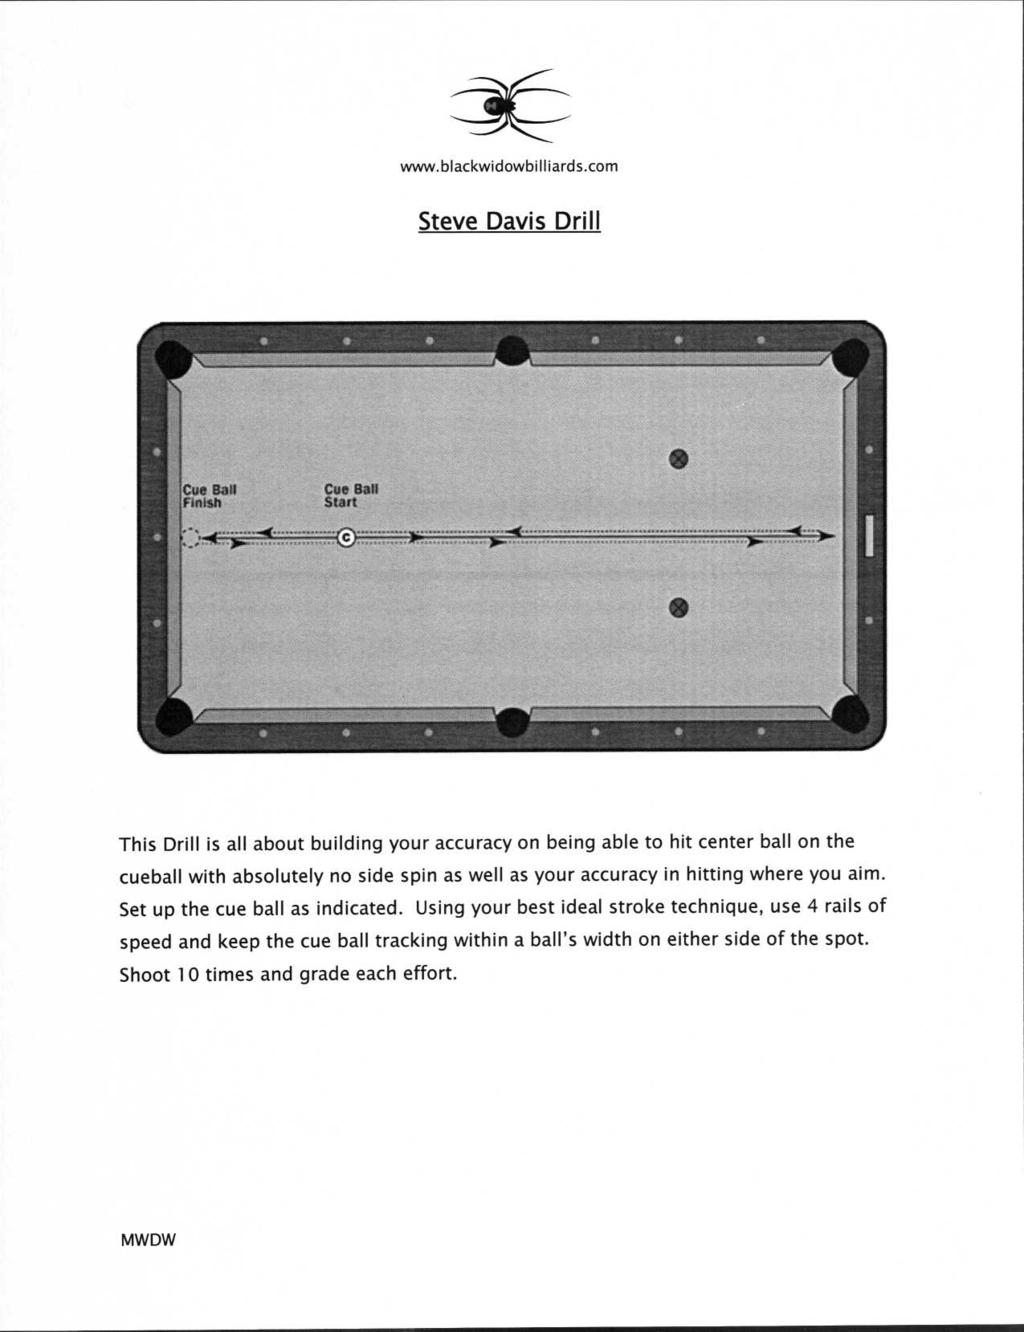 Steve Davis Drill This Drill is all about building your accuracy on being able to hit center ball on the cueball with absolutely no side spin as well as your accuracy in hitting where you aim.